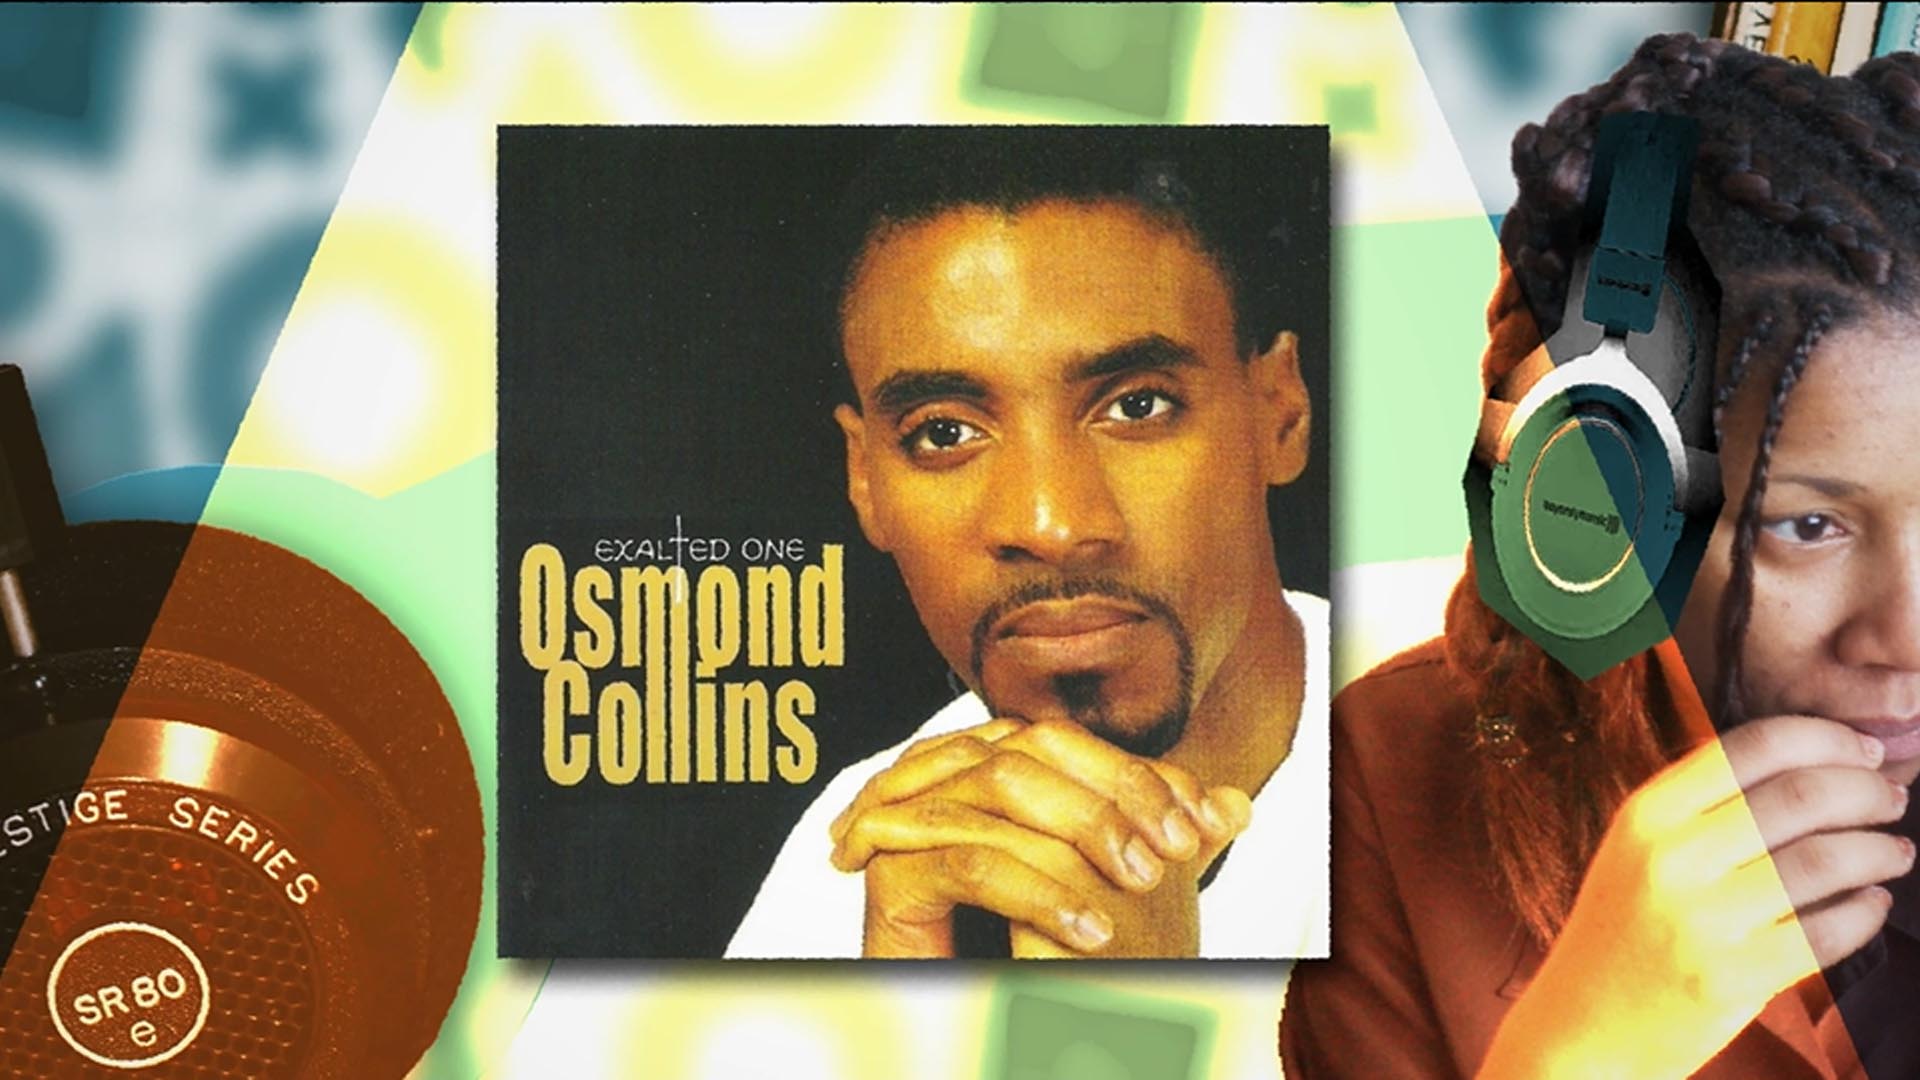 Album cover of Osmond Collins next to photo of woman wearing headphones